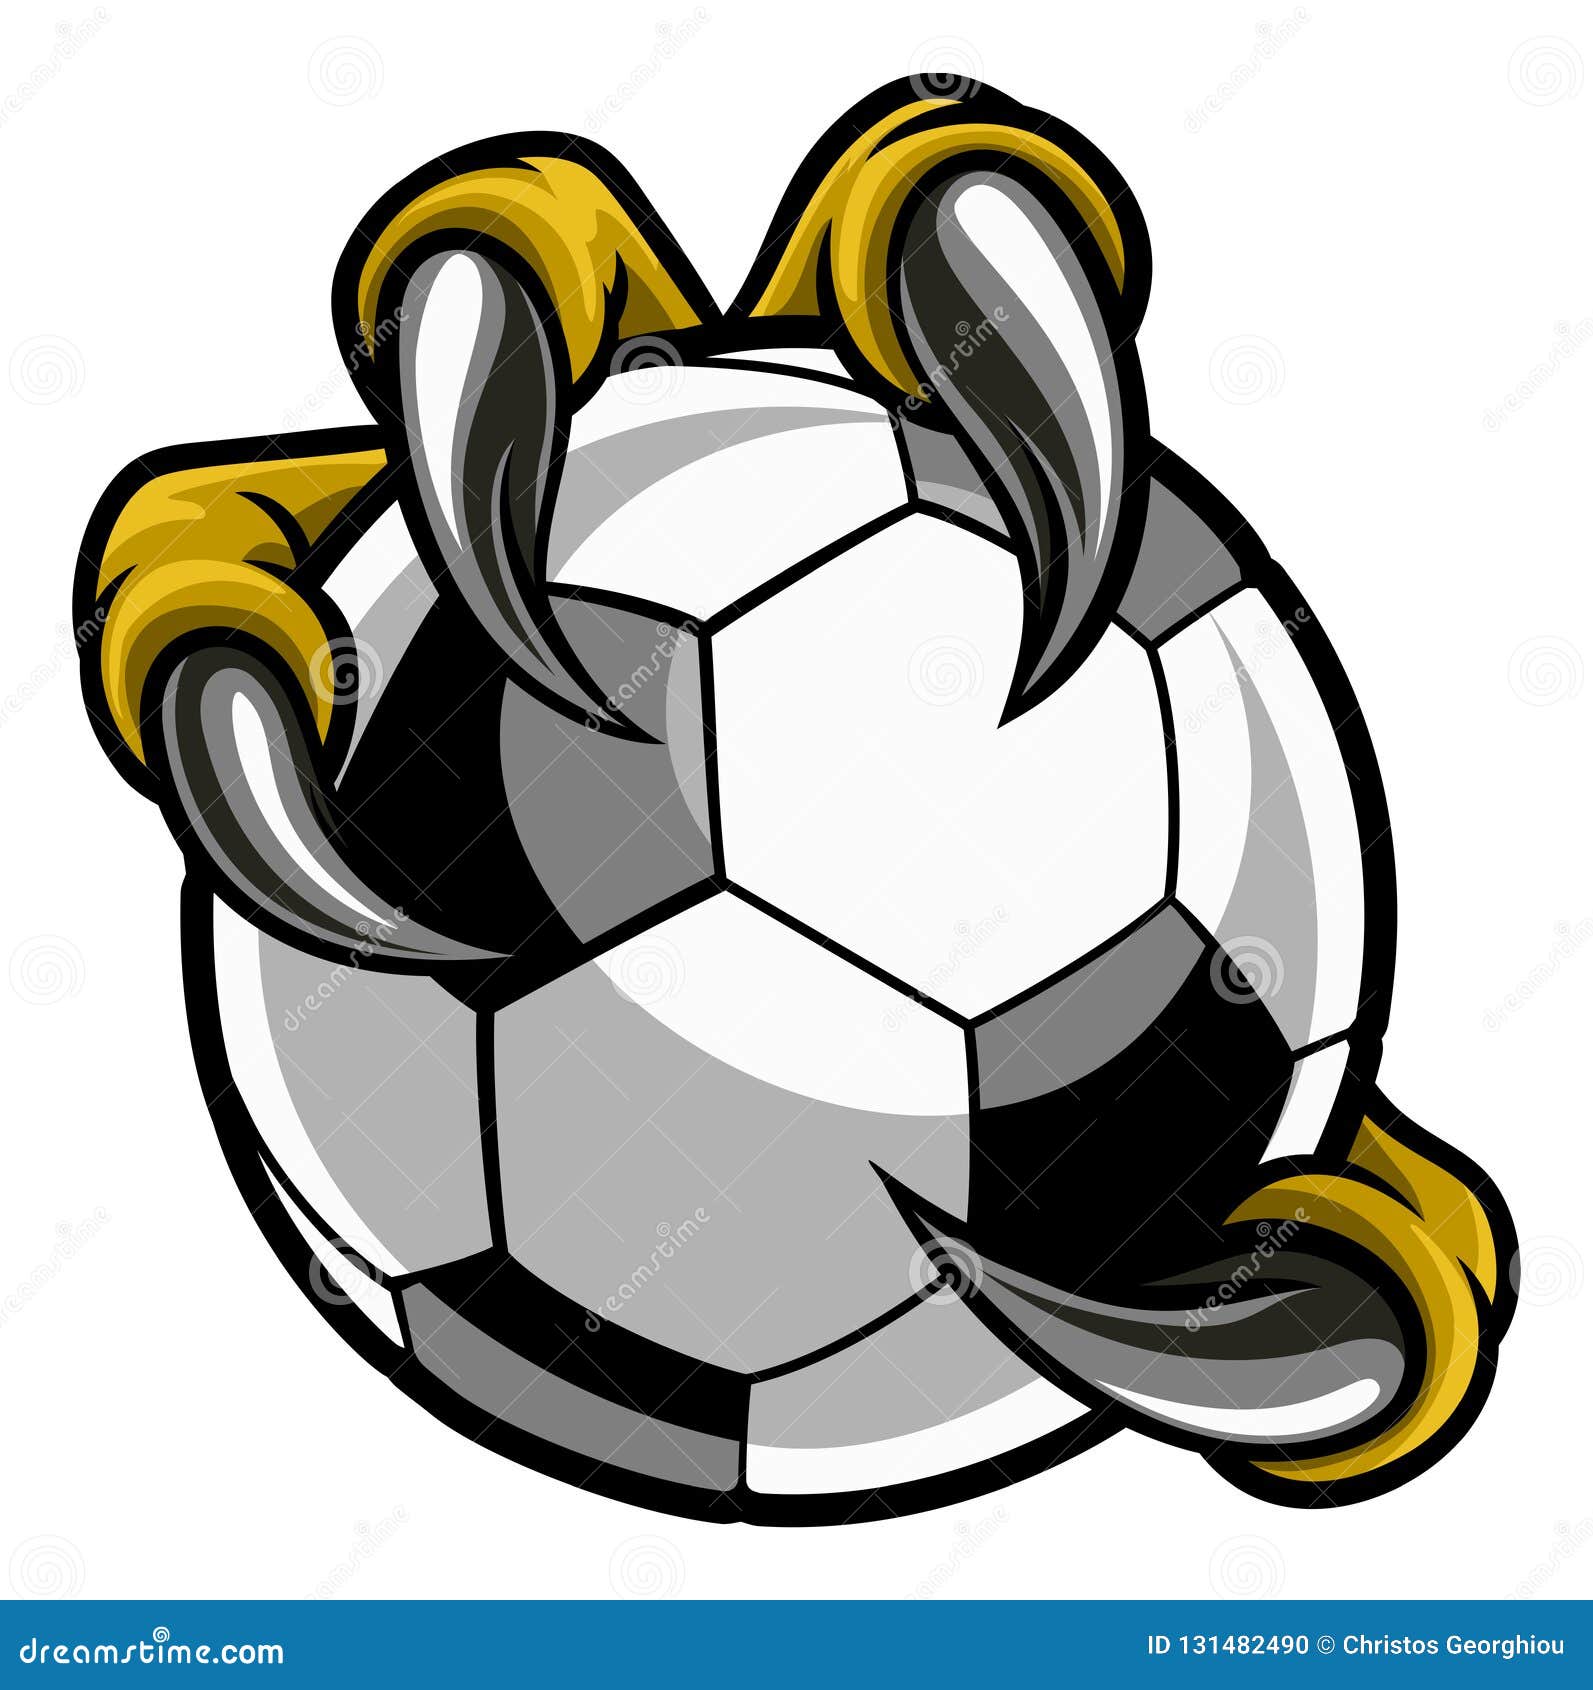 eagle bird monster claw talons holding soccer ball